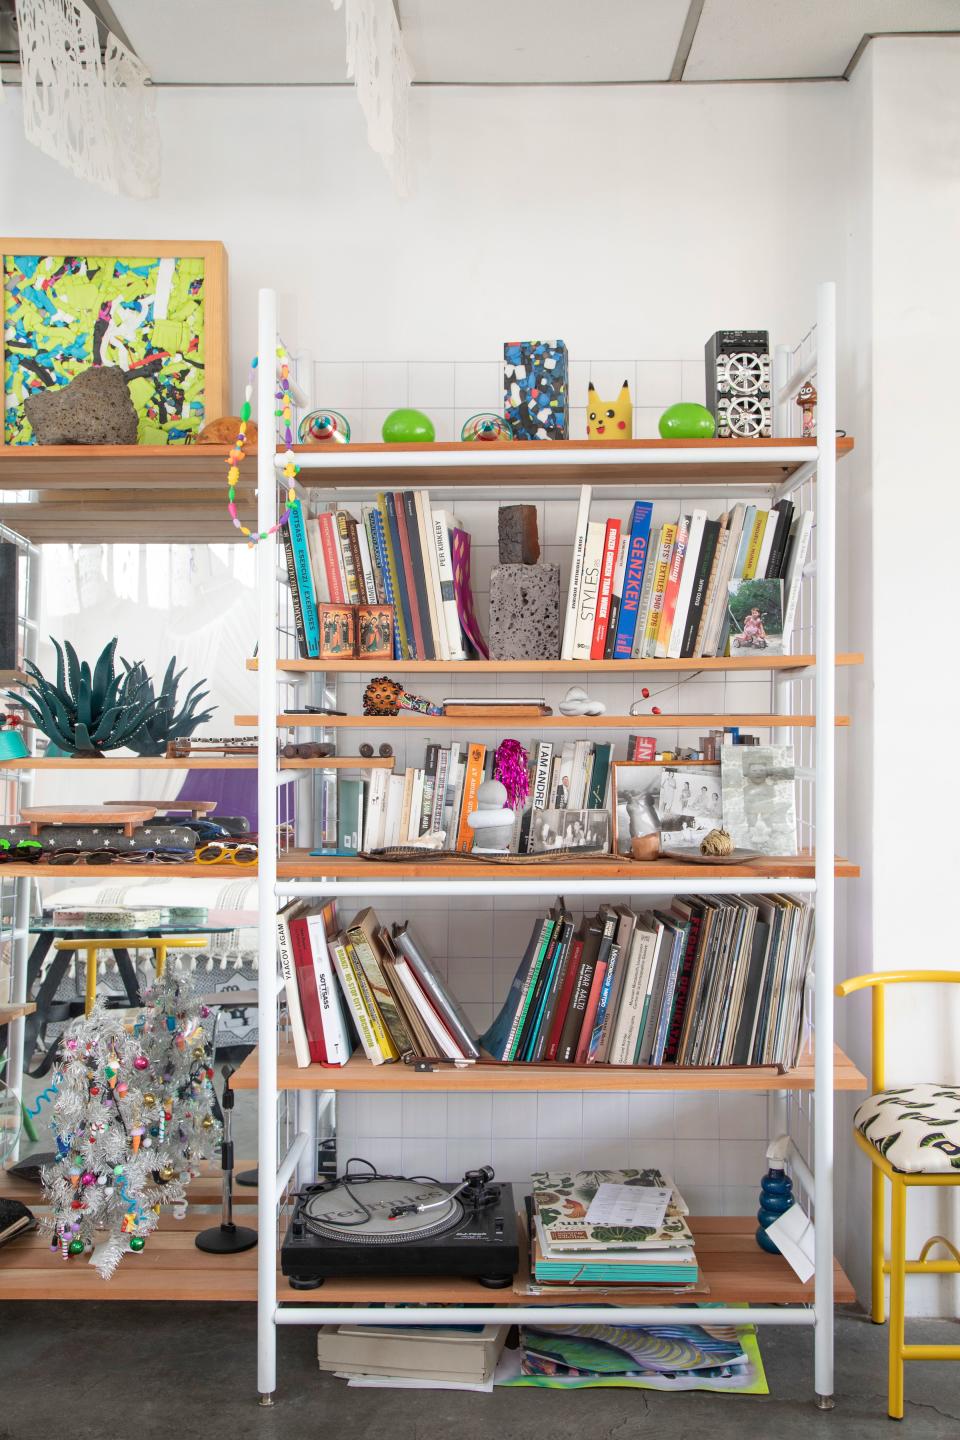 Bookshelves hold a hodgepodge of multicolored trinkets and treasures.